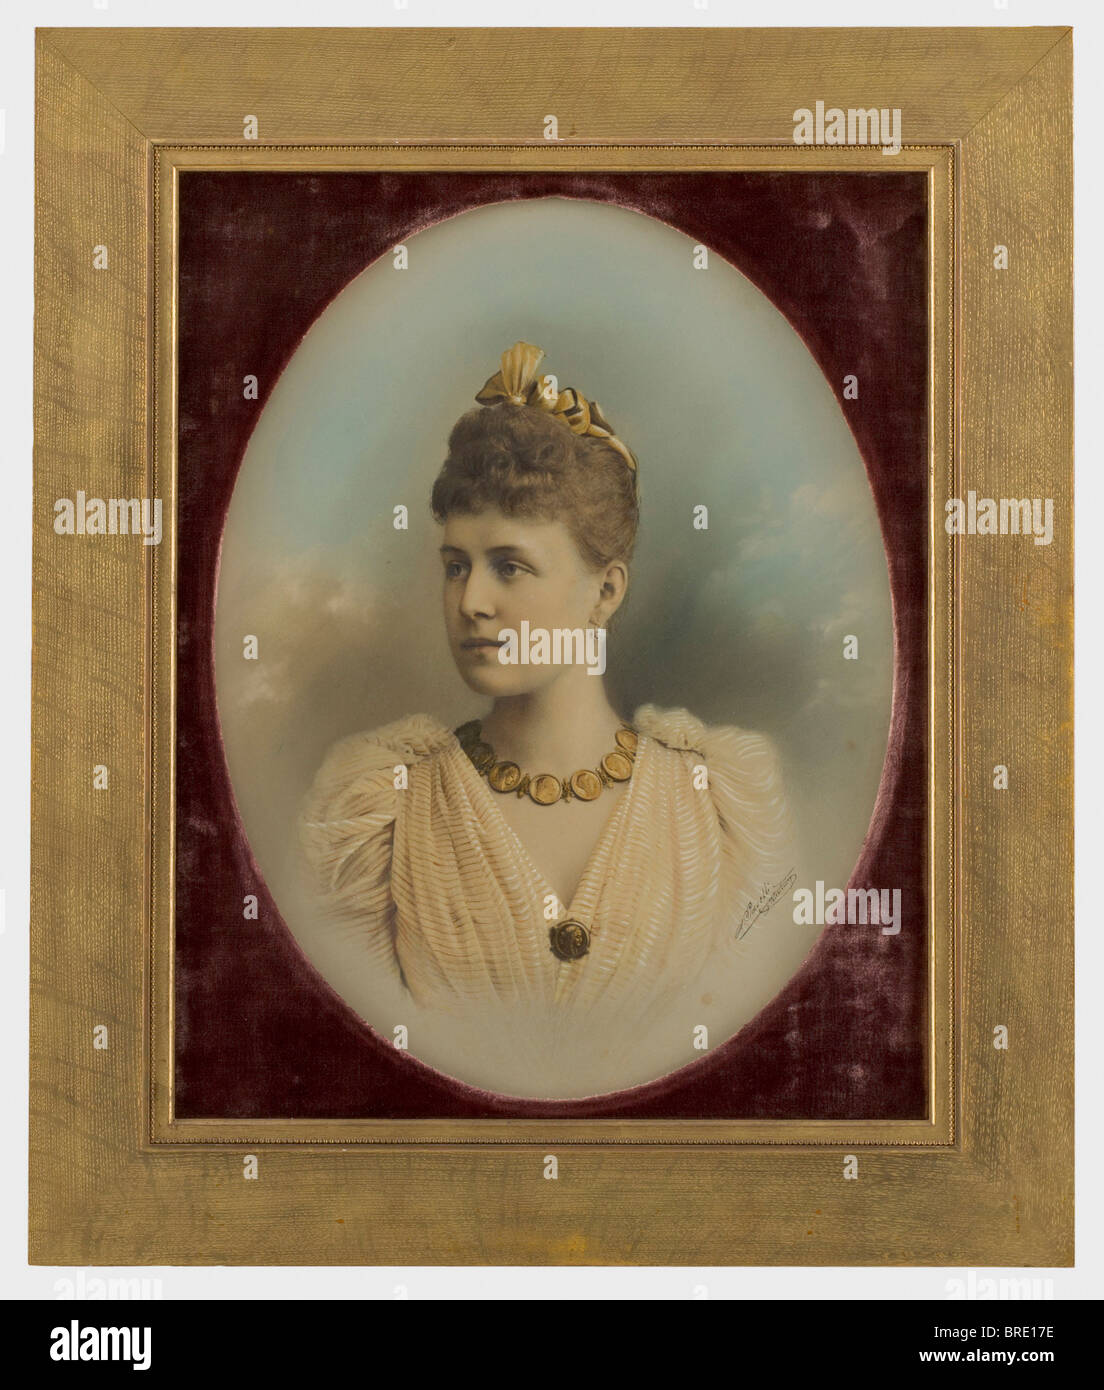 A portrait of the Grand Duchess Alexandra Georgijevna (1870 - 1891), a coloured, vertically oval photograph With the ink signature of the court photographer, "A. Pasetti, St. Petersbourg" on the right edge. In a gilt wooden frame, under glass, in wine red velvet passepartout, picture dimensions 6.5 x 42.5 cm, framed dimensions 77.5 x 65.3 cm. Label on the back, "H.V.v.W. G.v.R. Privateigentum No. 444" for the Duchess Vera of Württemberg, Grand Duchess of Russia. Alexander Ivanovich Pasetti studied at the St. Petersburg Art Academy and won a silver medal there i, Stock Photo